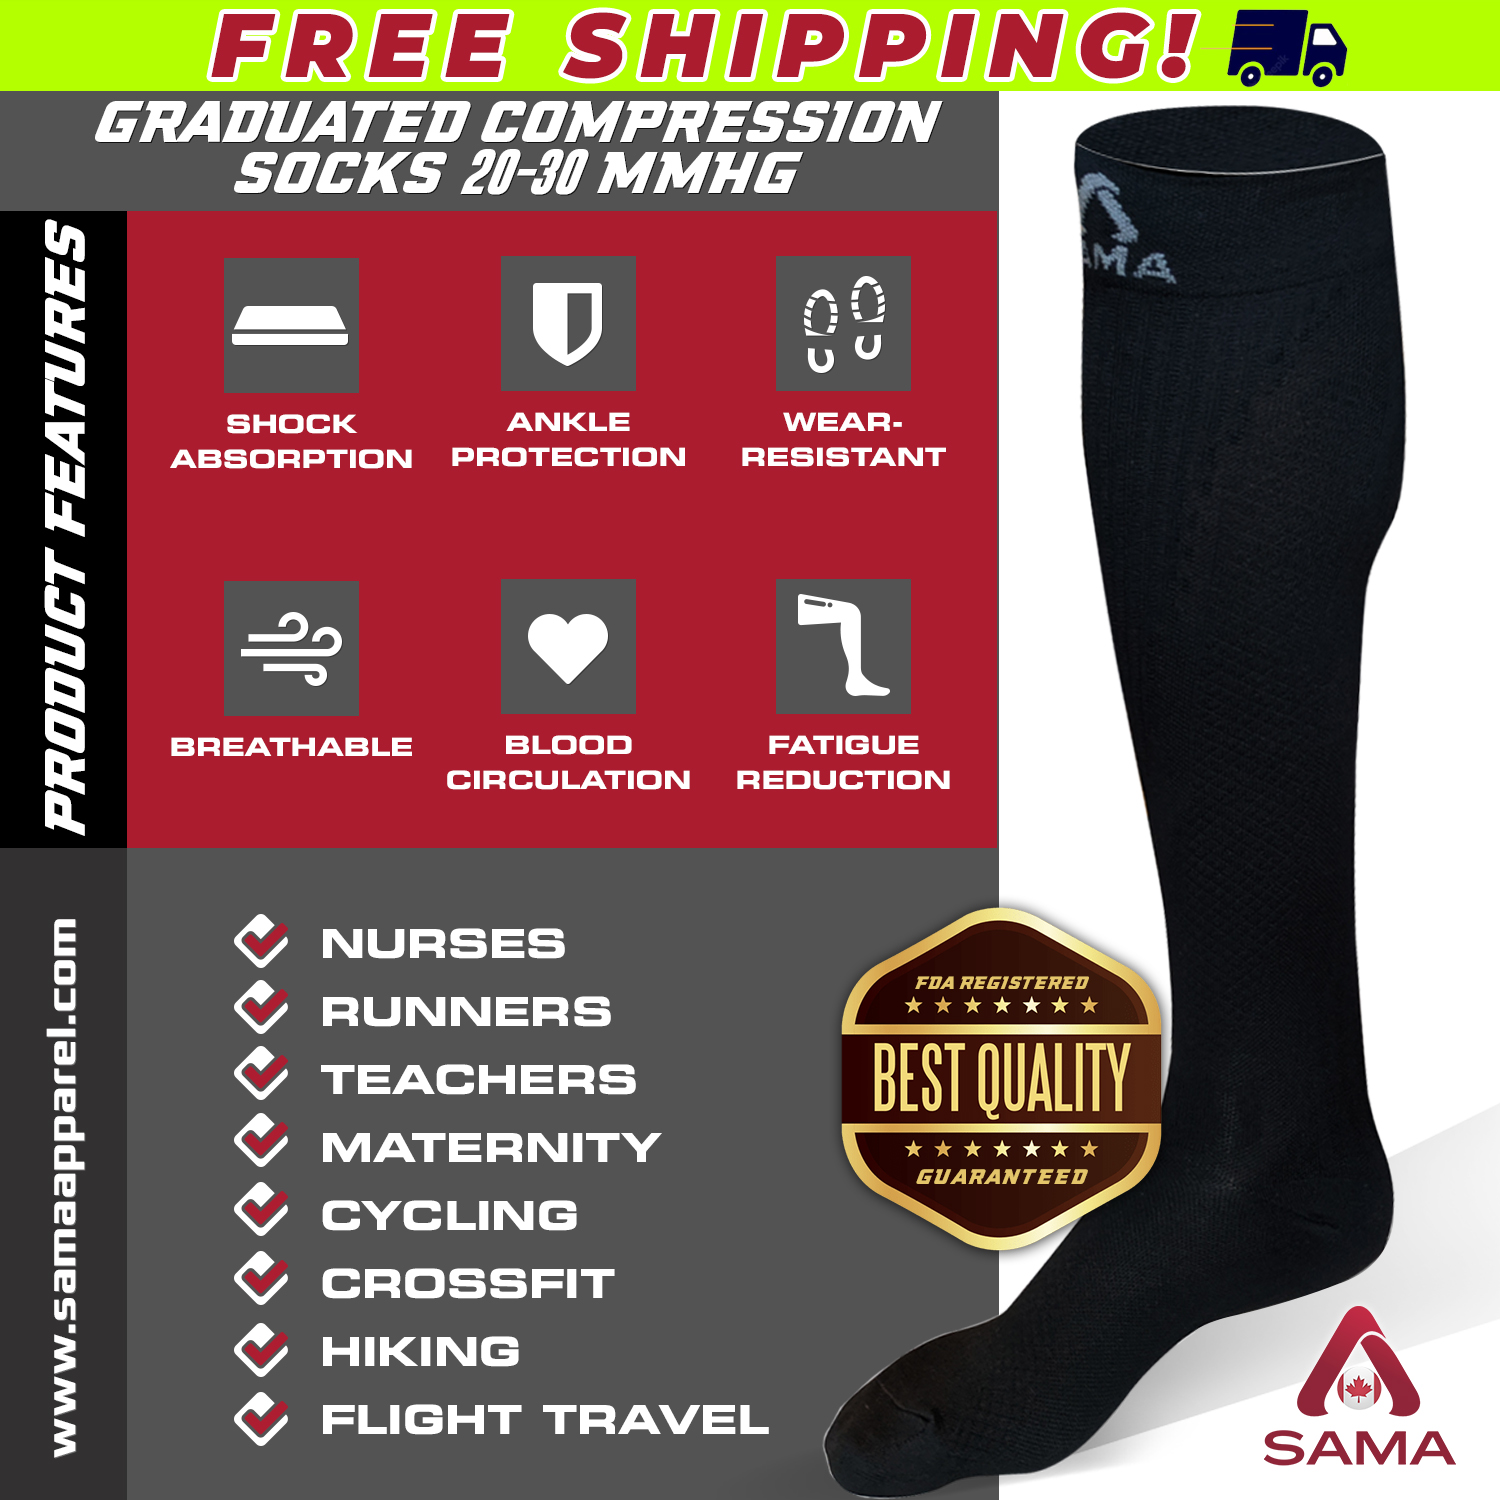 1 pair) plus size compression socks wide calf 20-30 mmHg for women